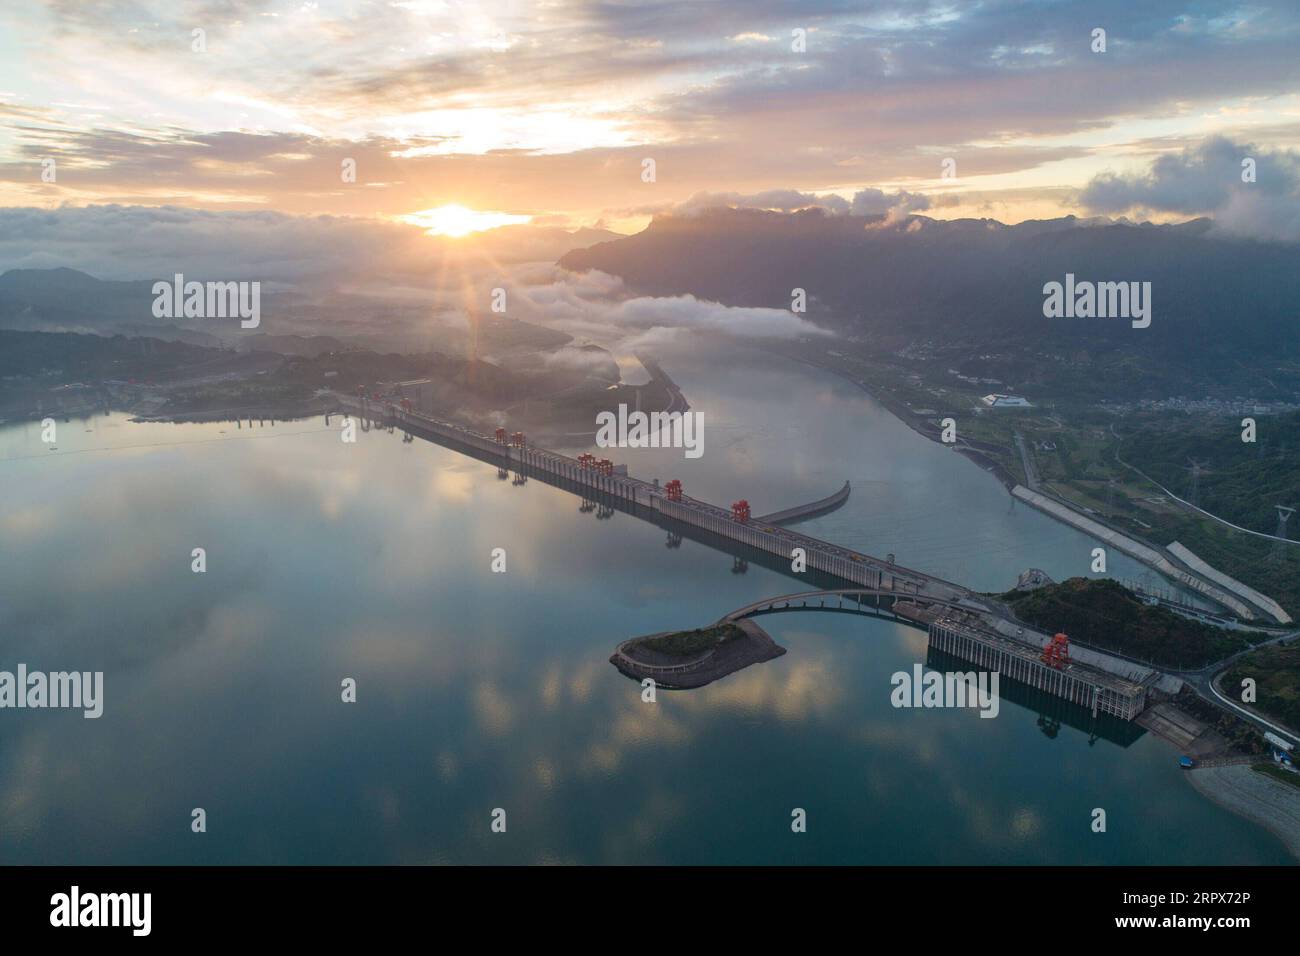 200511 -- BEIJING, May 11, 2020 -- Aerial photo taken on May 10, 2020 shows a view of the Three Gorges Dam in early morning after a rainfall in central China s Hubei Province. Photo by /Xinhua XINHUA PHOTOS OF THE DAY WangxGang PUBLICATIONxNOTxINxCHN Stock Photo